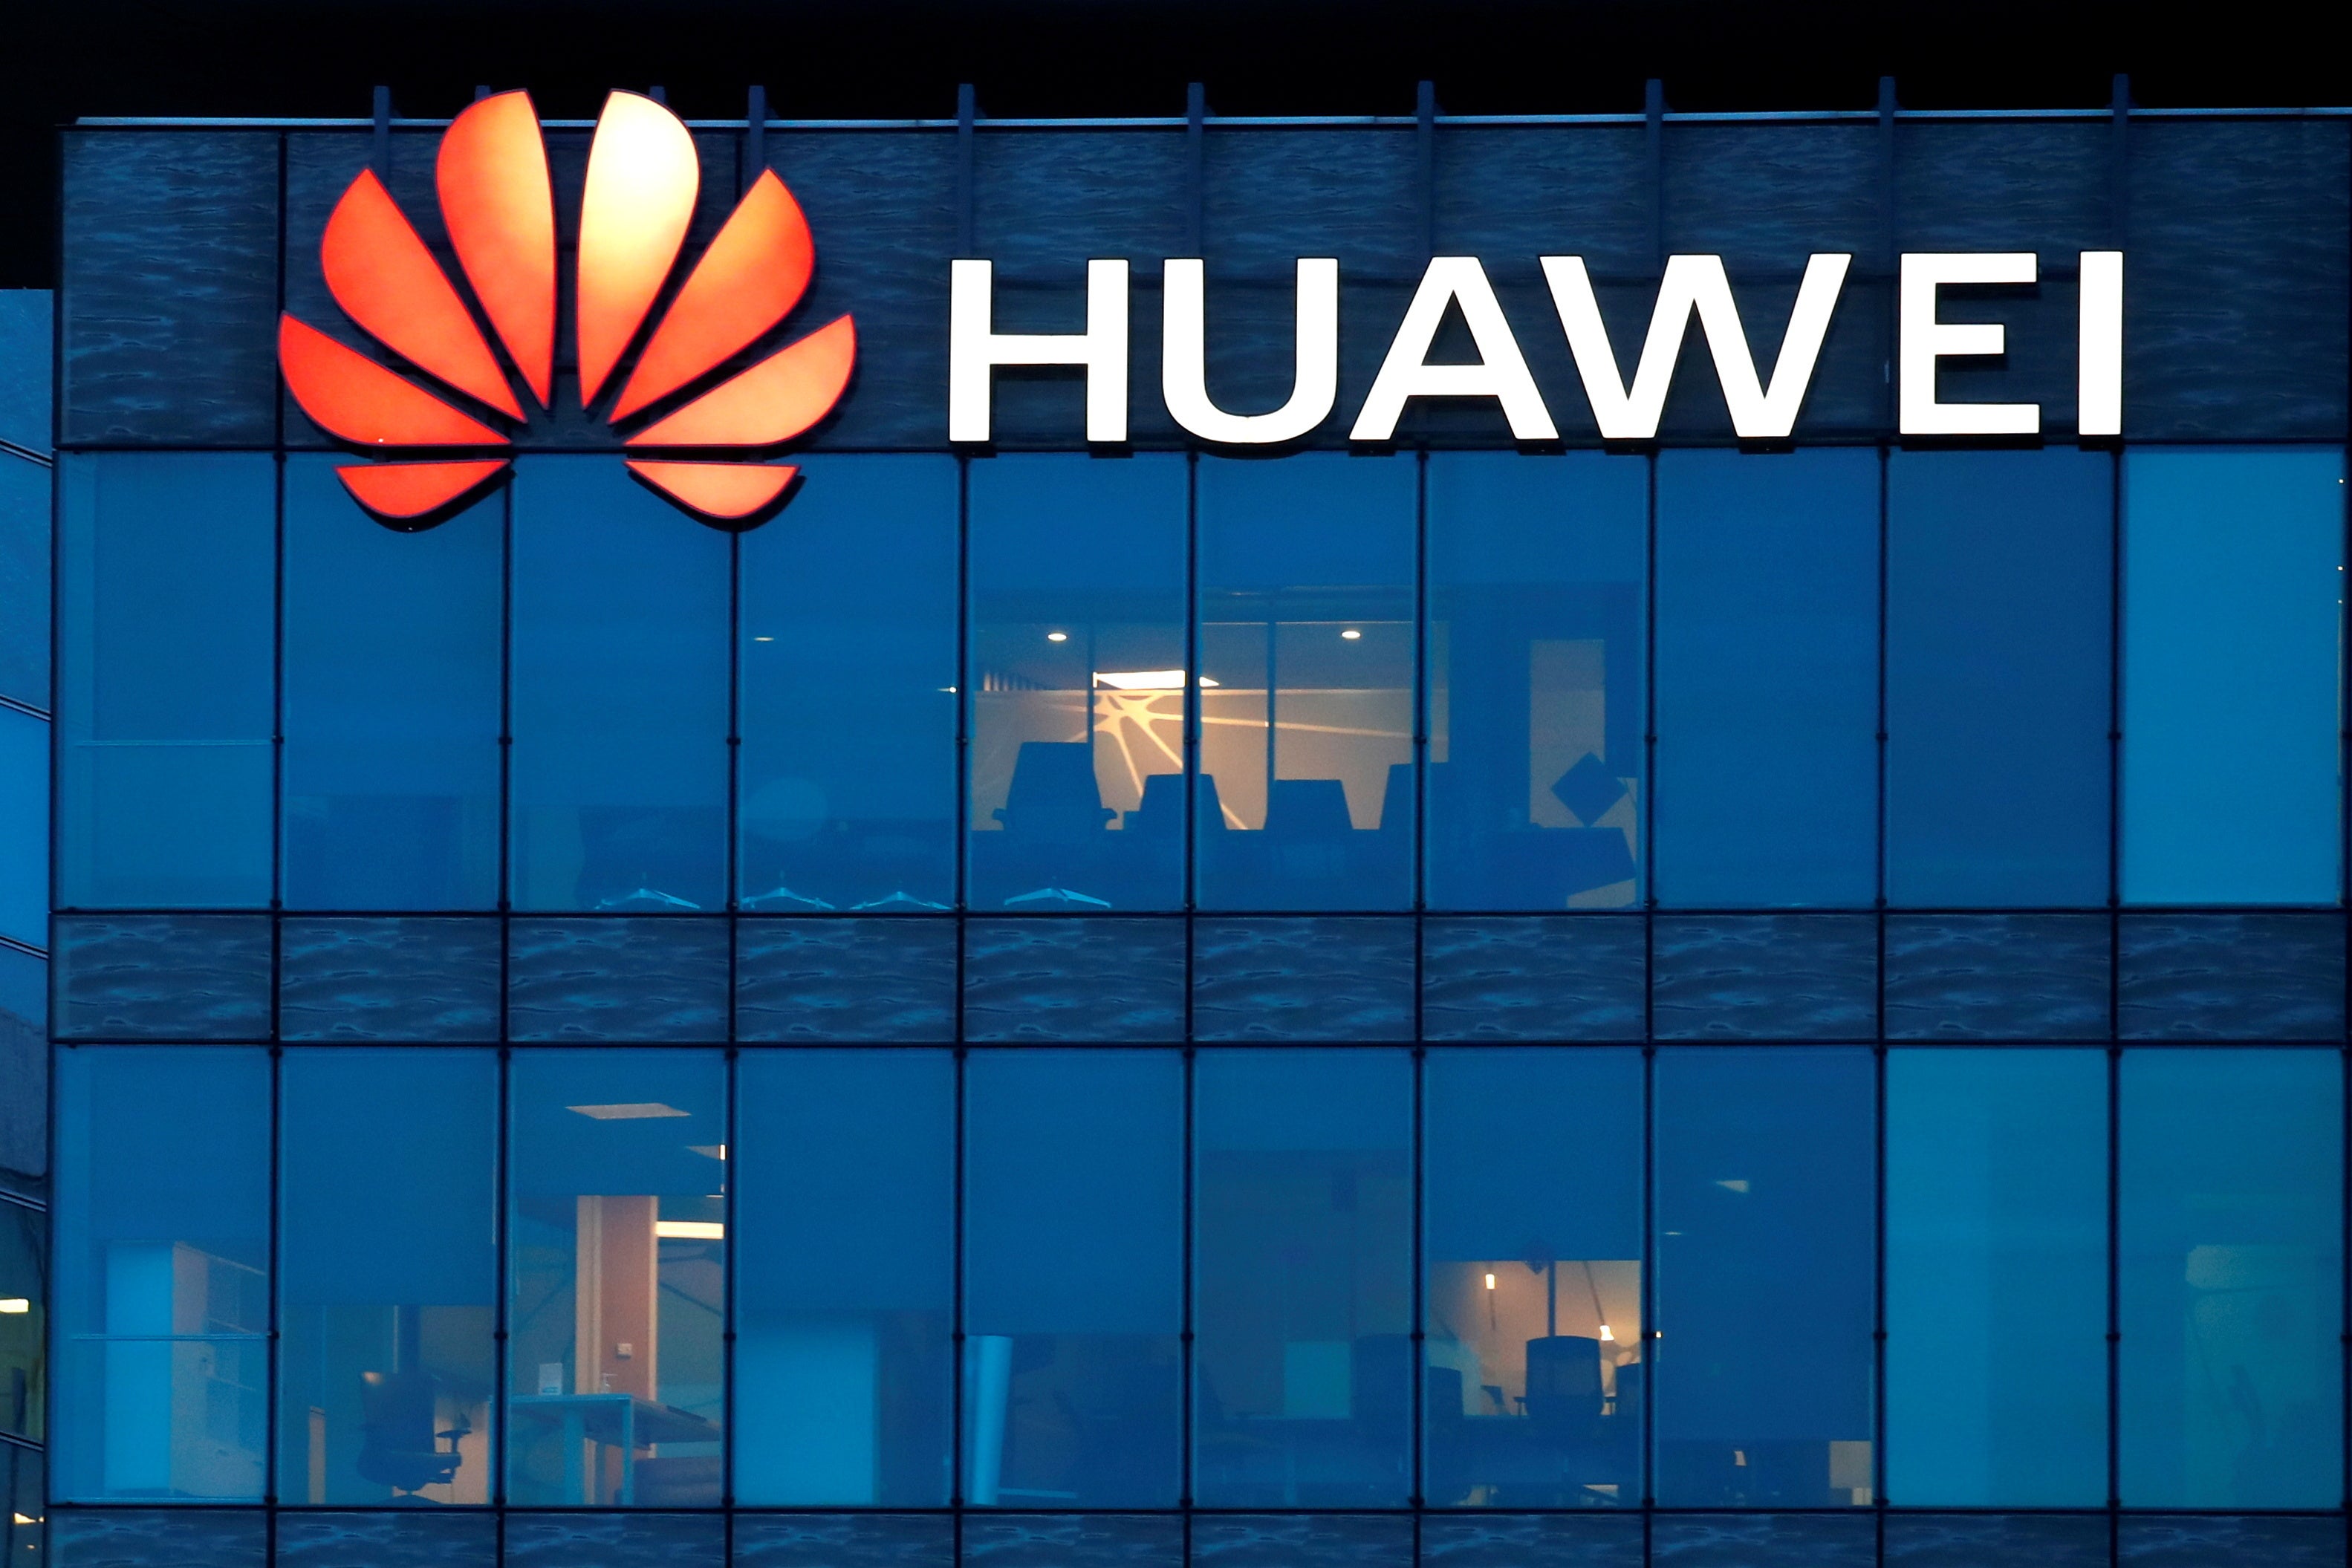 In Europe, Britain and Sweden have banned Huawei equipment